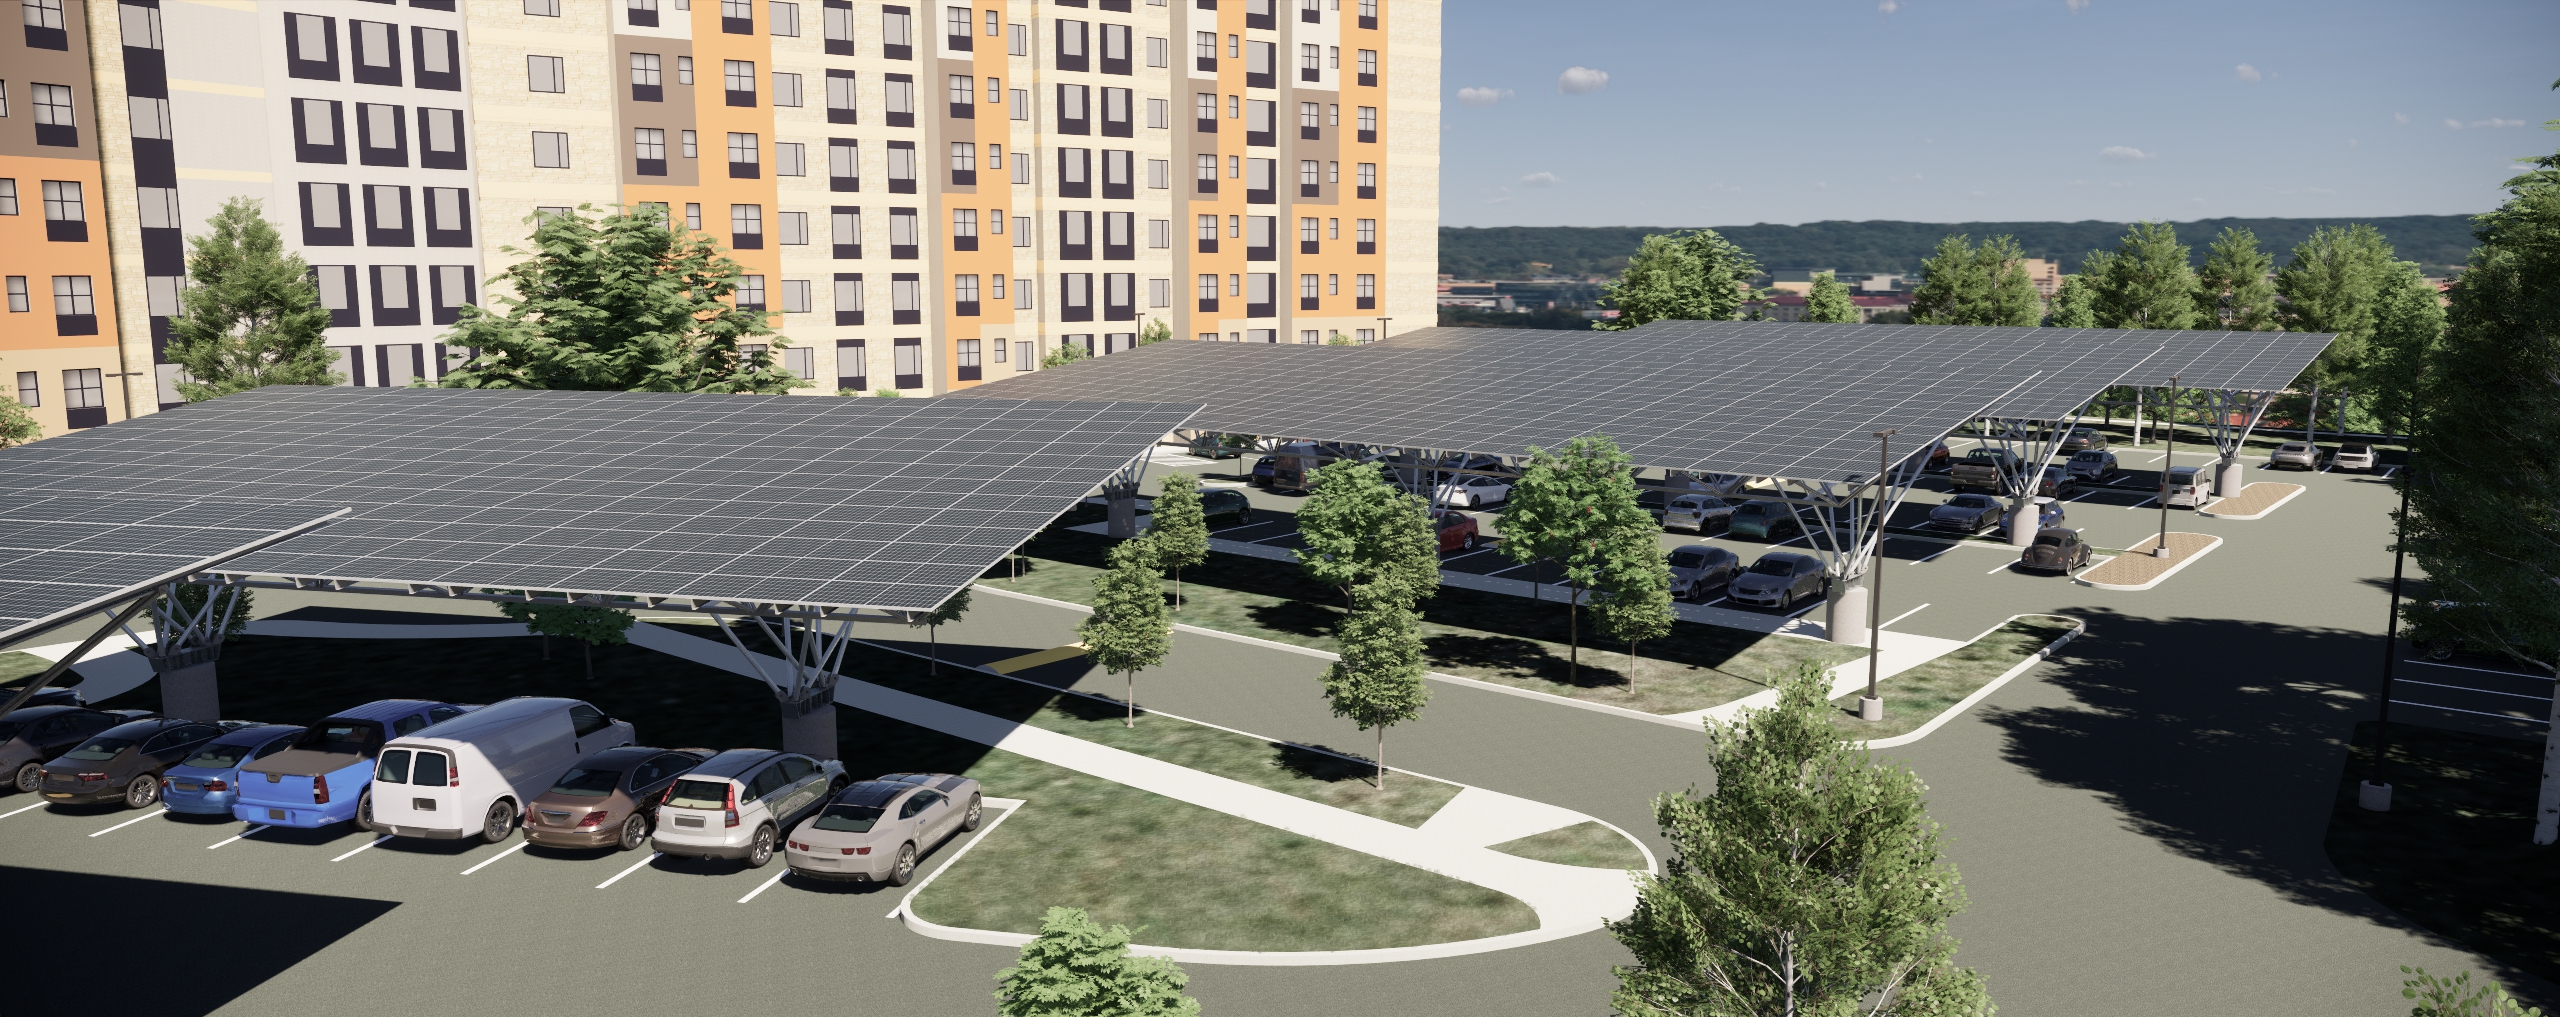 Affordable Housing Communities in DC Getting Solar Power